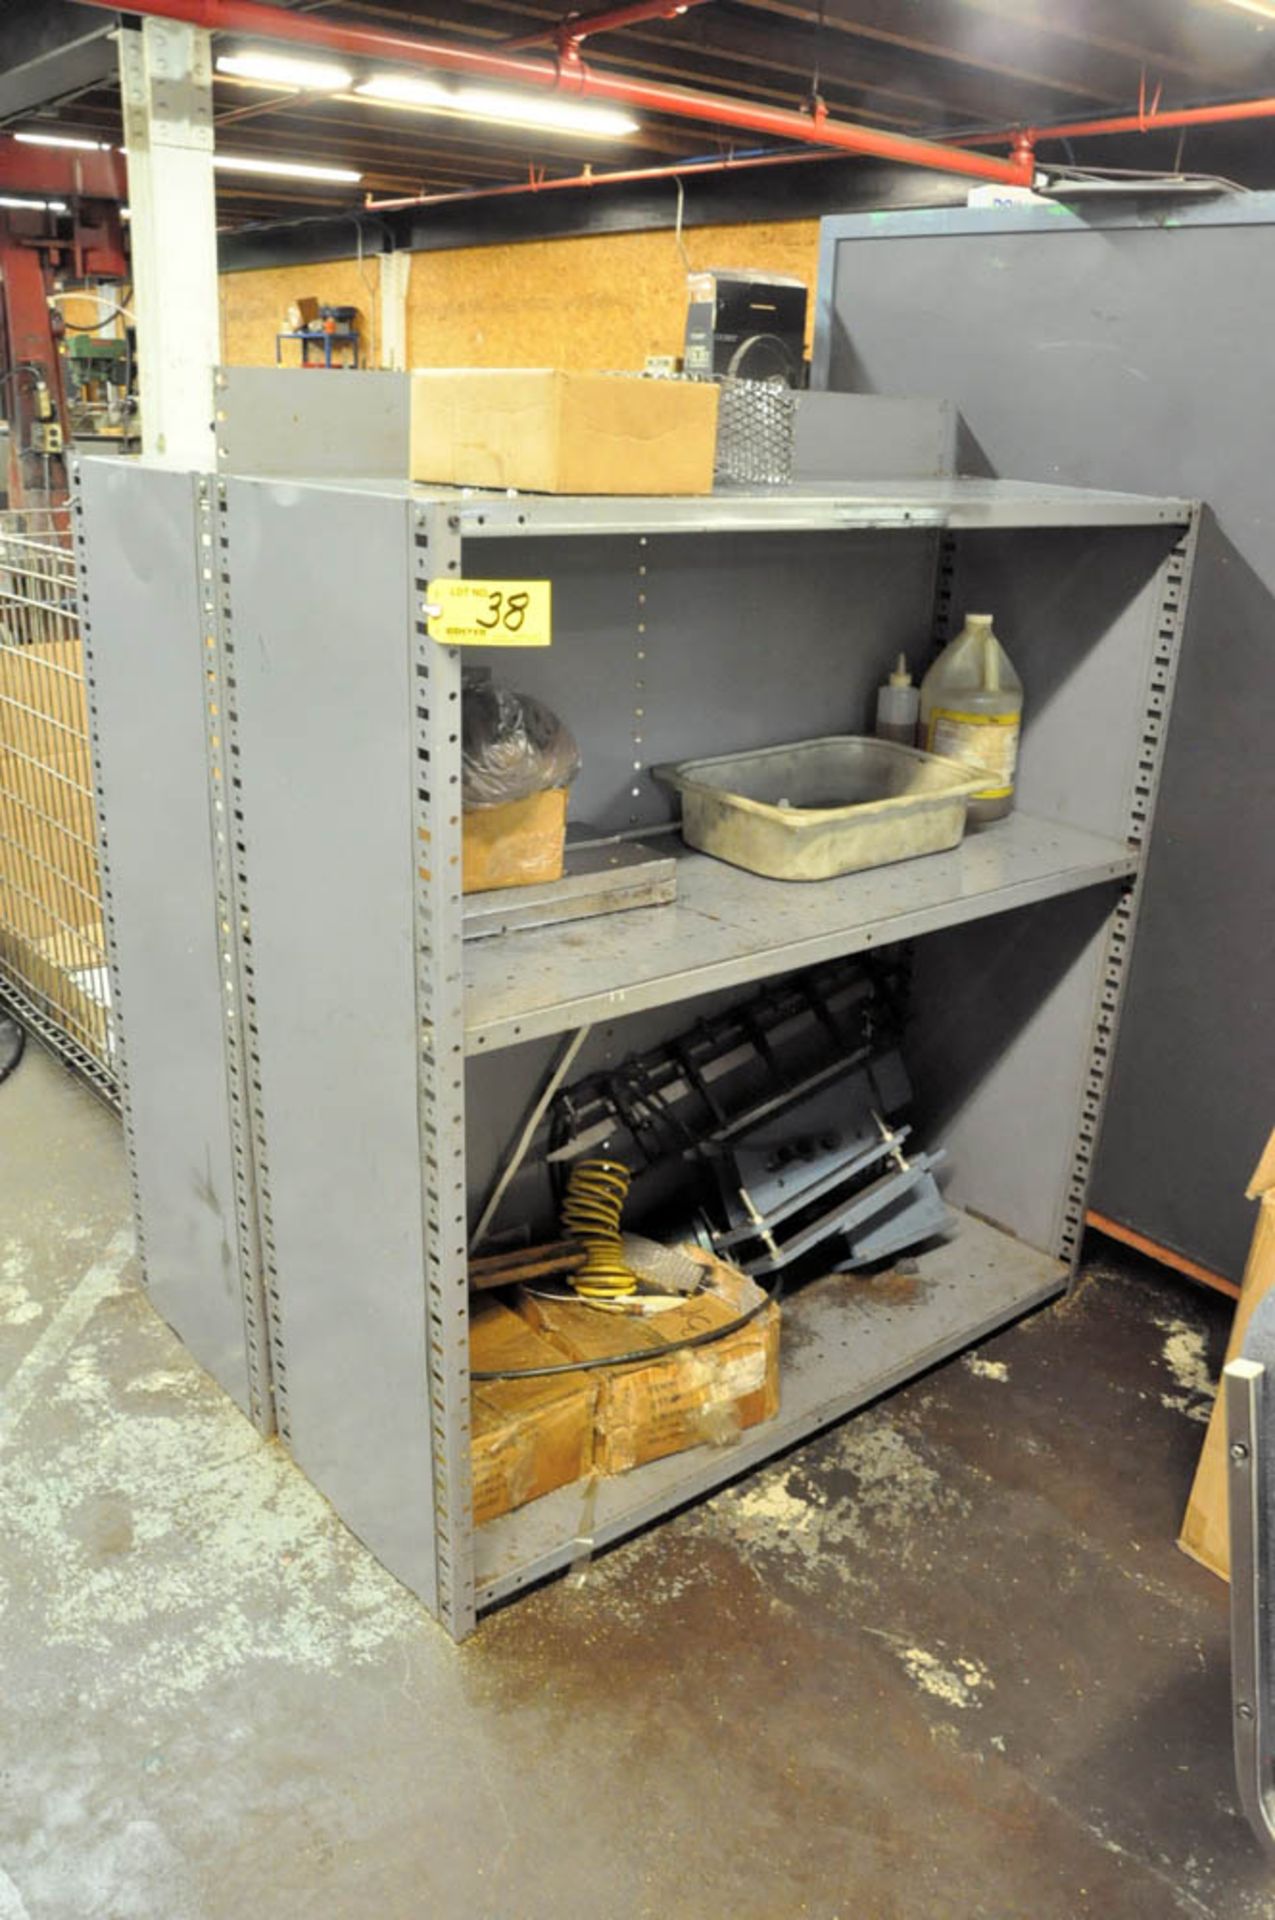 (2) SUPPLY CABINETS AND (2) SHELVING UNITS WITH MISCELLANEOUS CONTENTS - Image 2 of 4